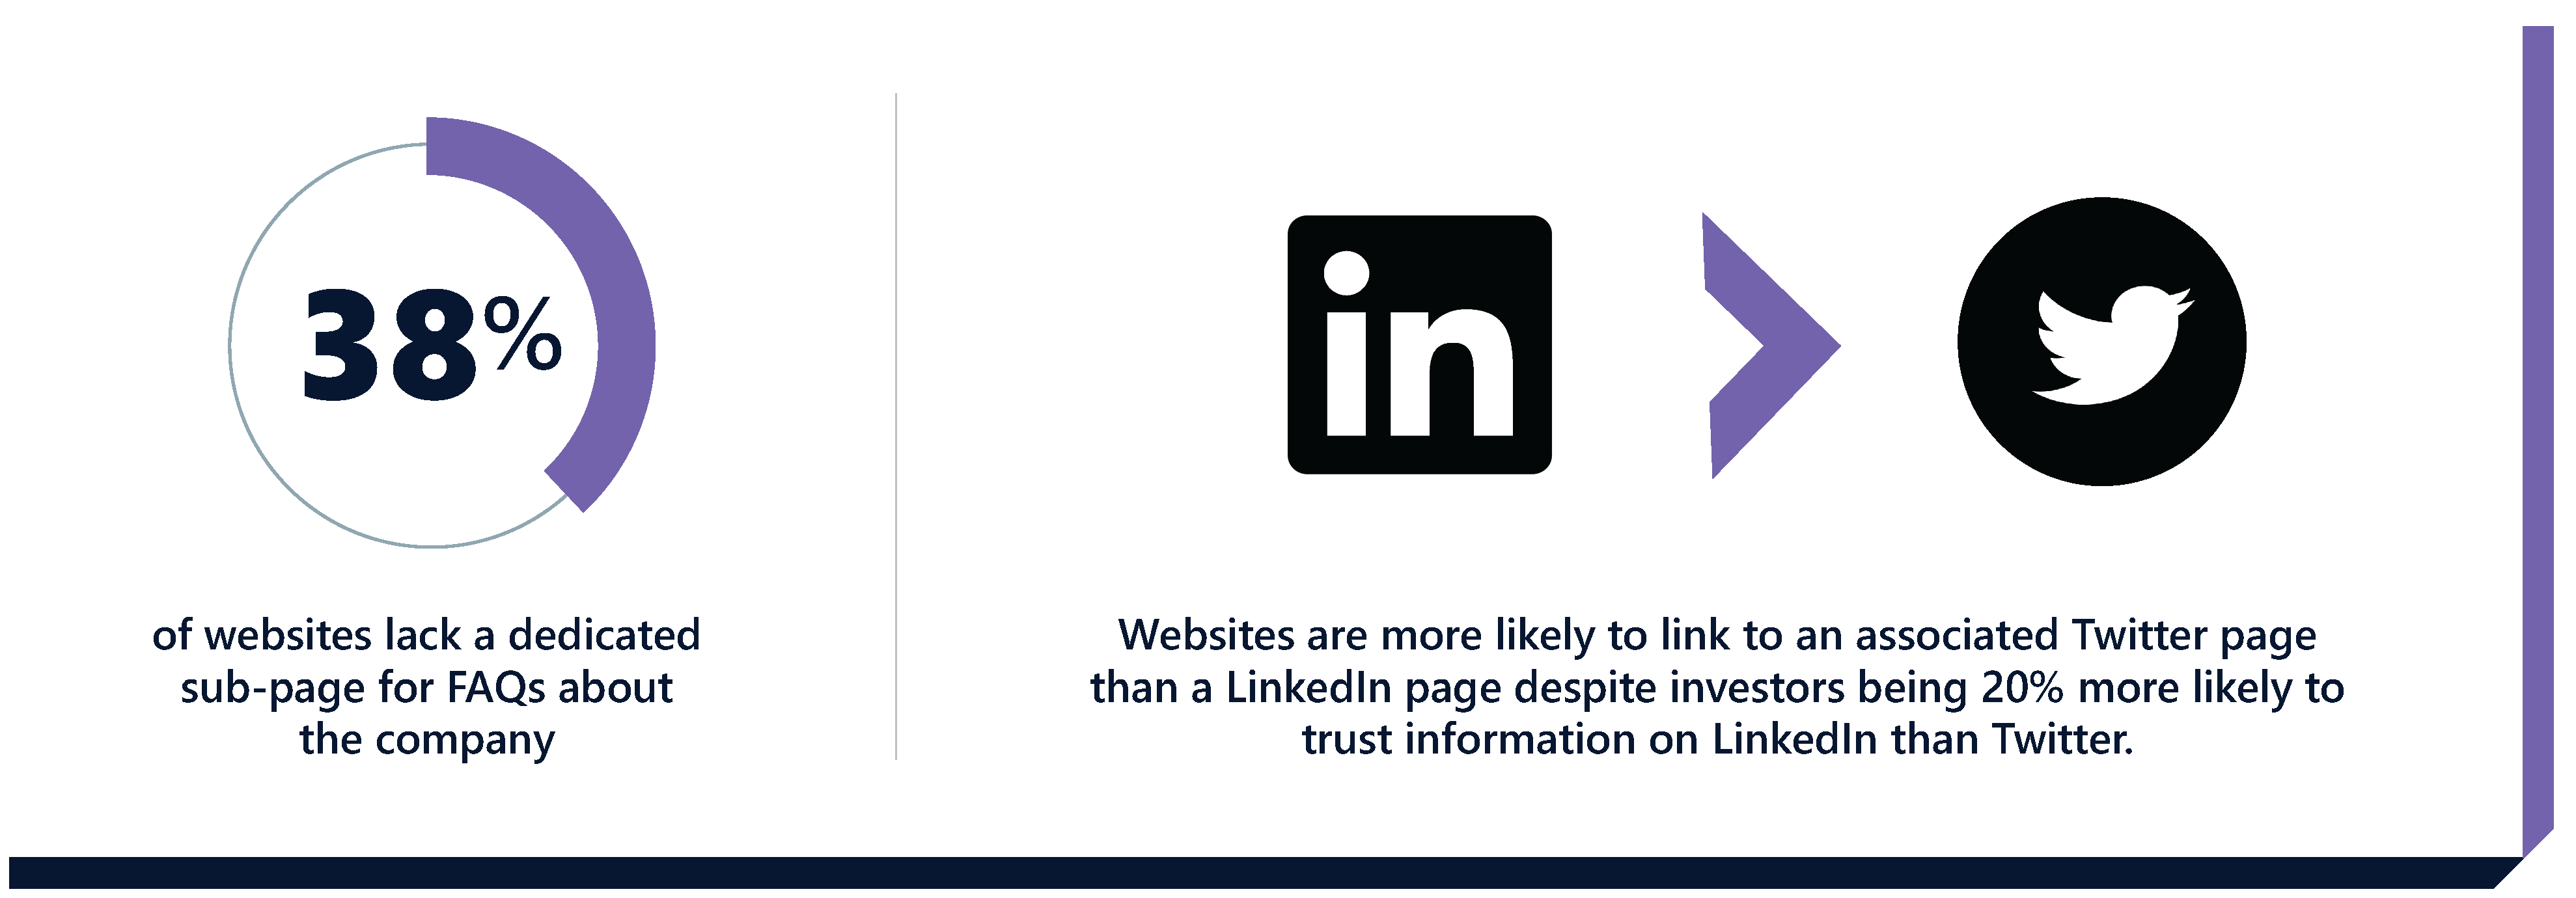 Pie chart showing that 38% of investor websites lack a FAQ page. Brunswick’s Digital Investor Survey reveals that websites are more likely to link to Twitter than LinkedIn, but investors are more likely to trust LinkedIn.